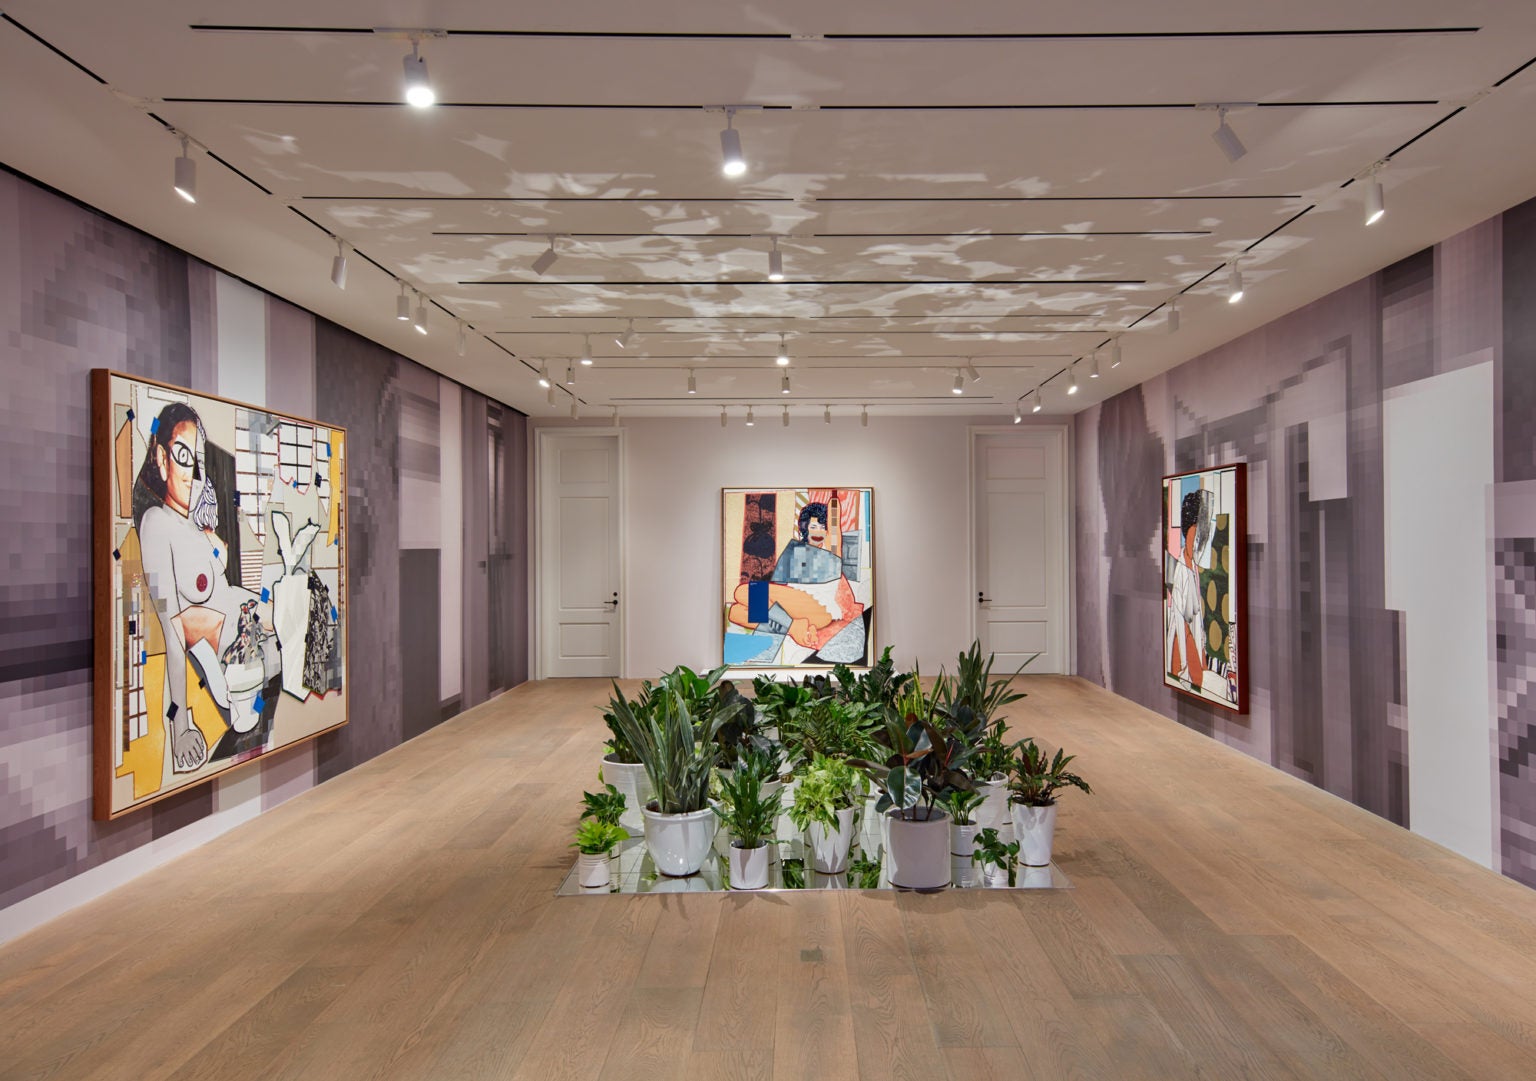 Mickalene Thomas’ Celebration Of Black Women’s Bodies Is On View In 4 Global Cities